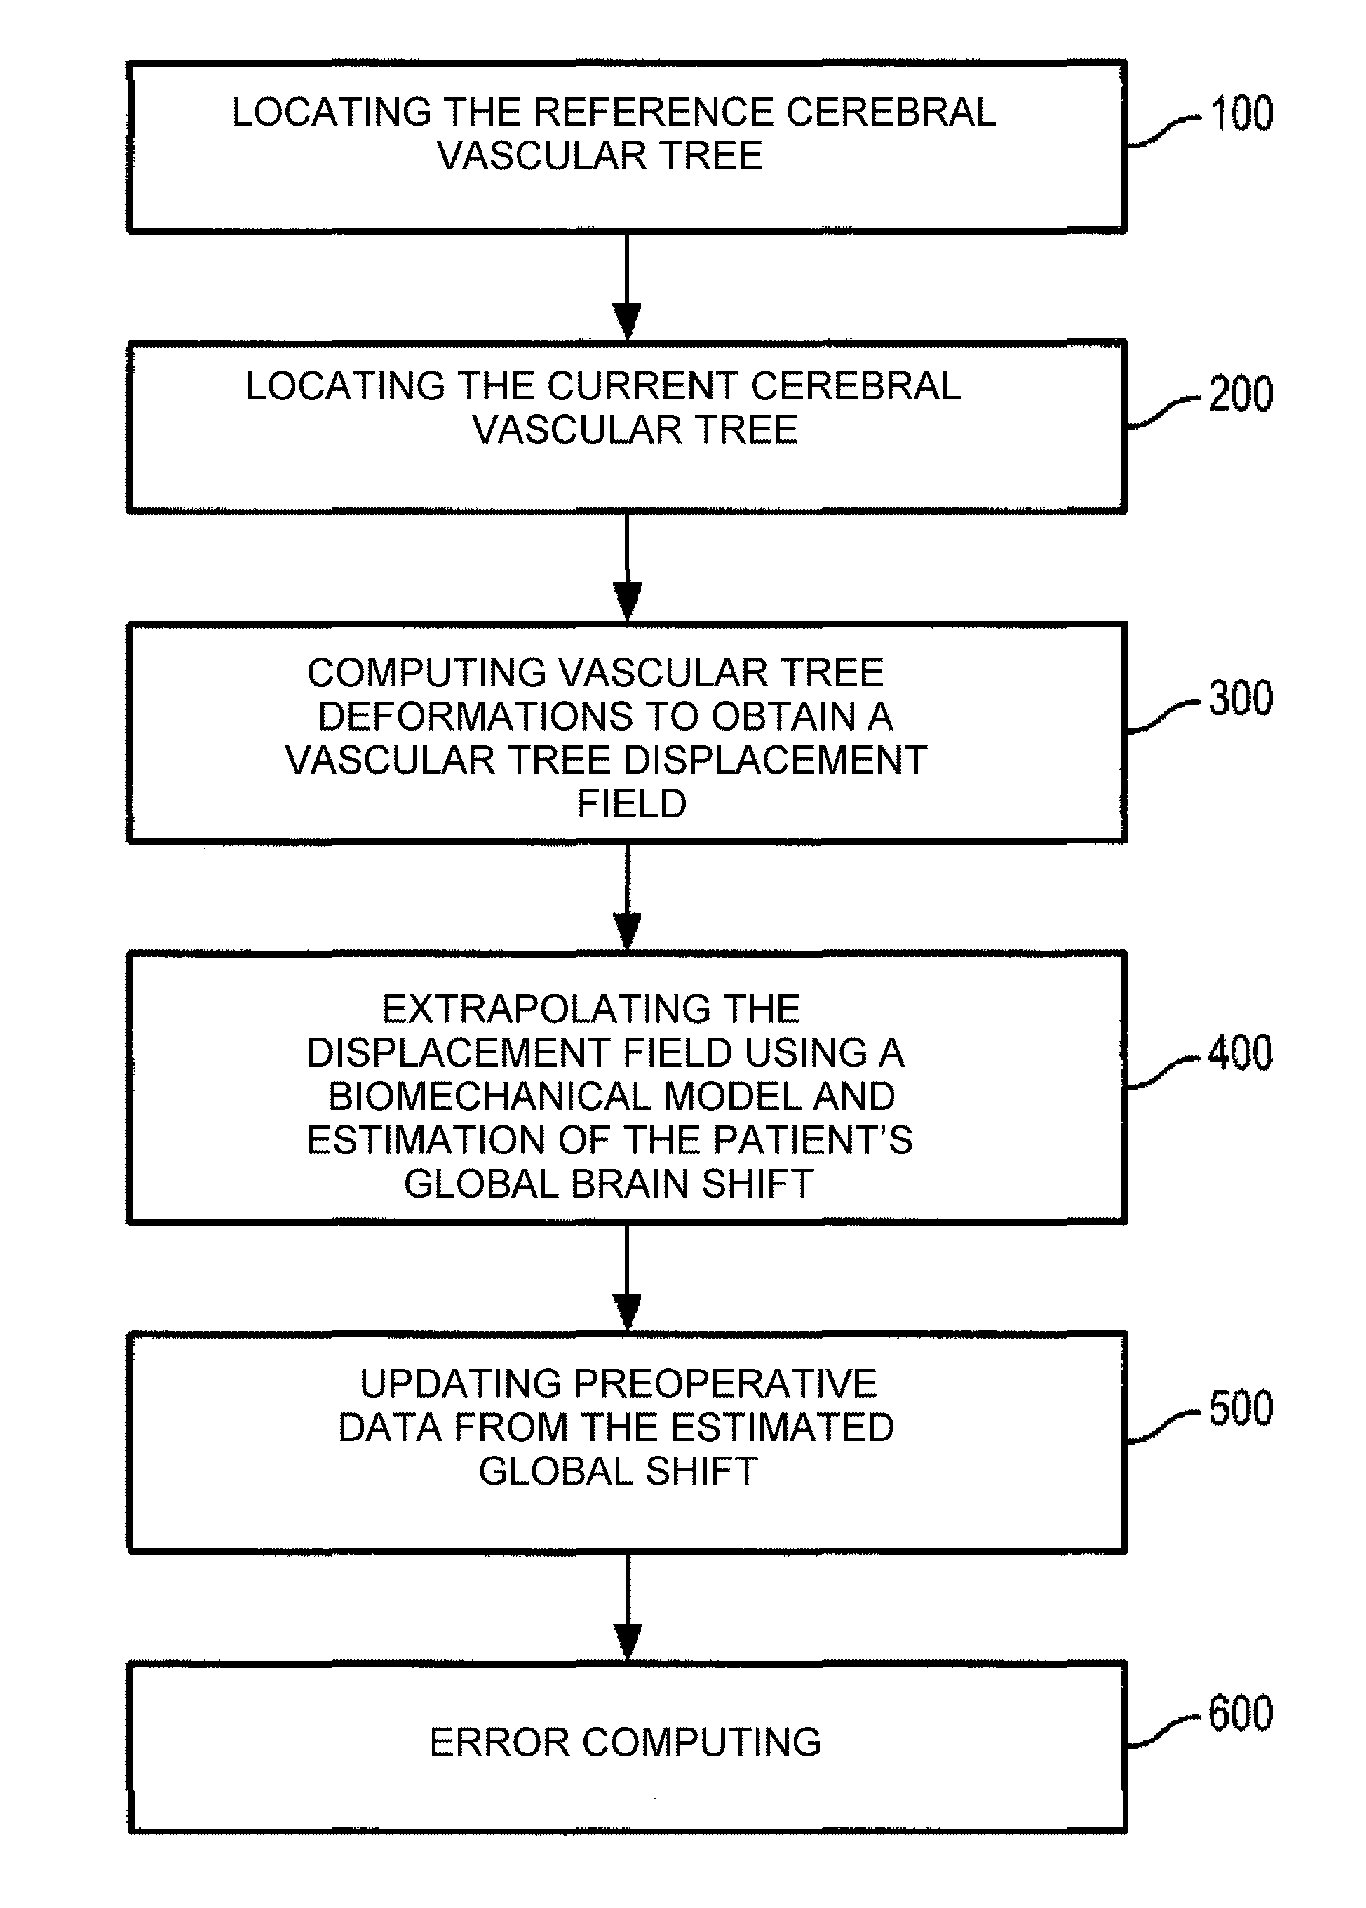 Image processing method for estimating a brain shift in a patient